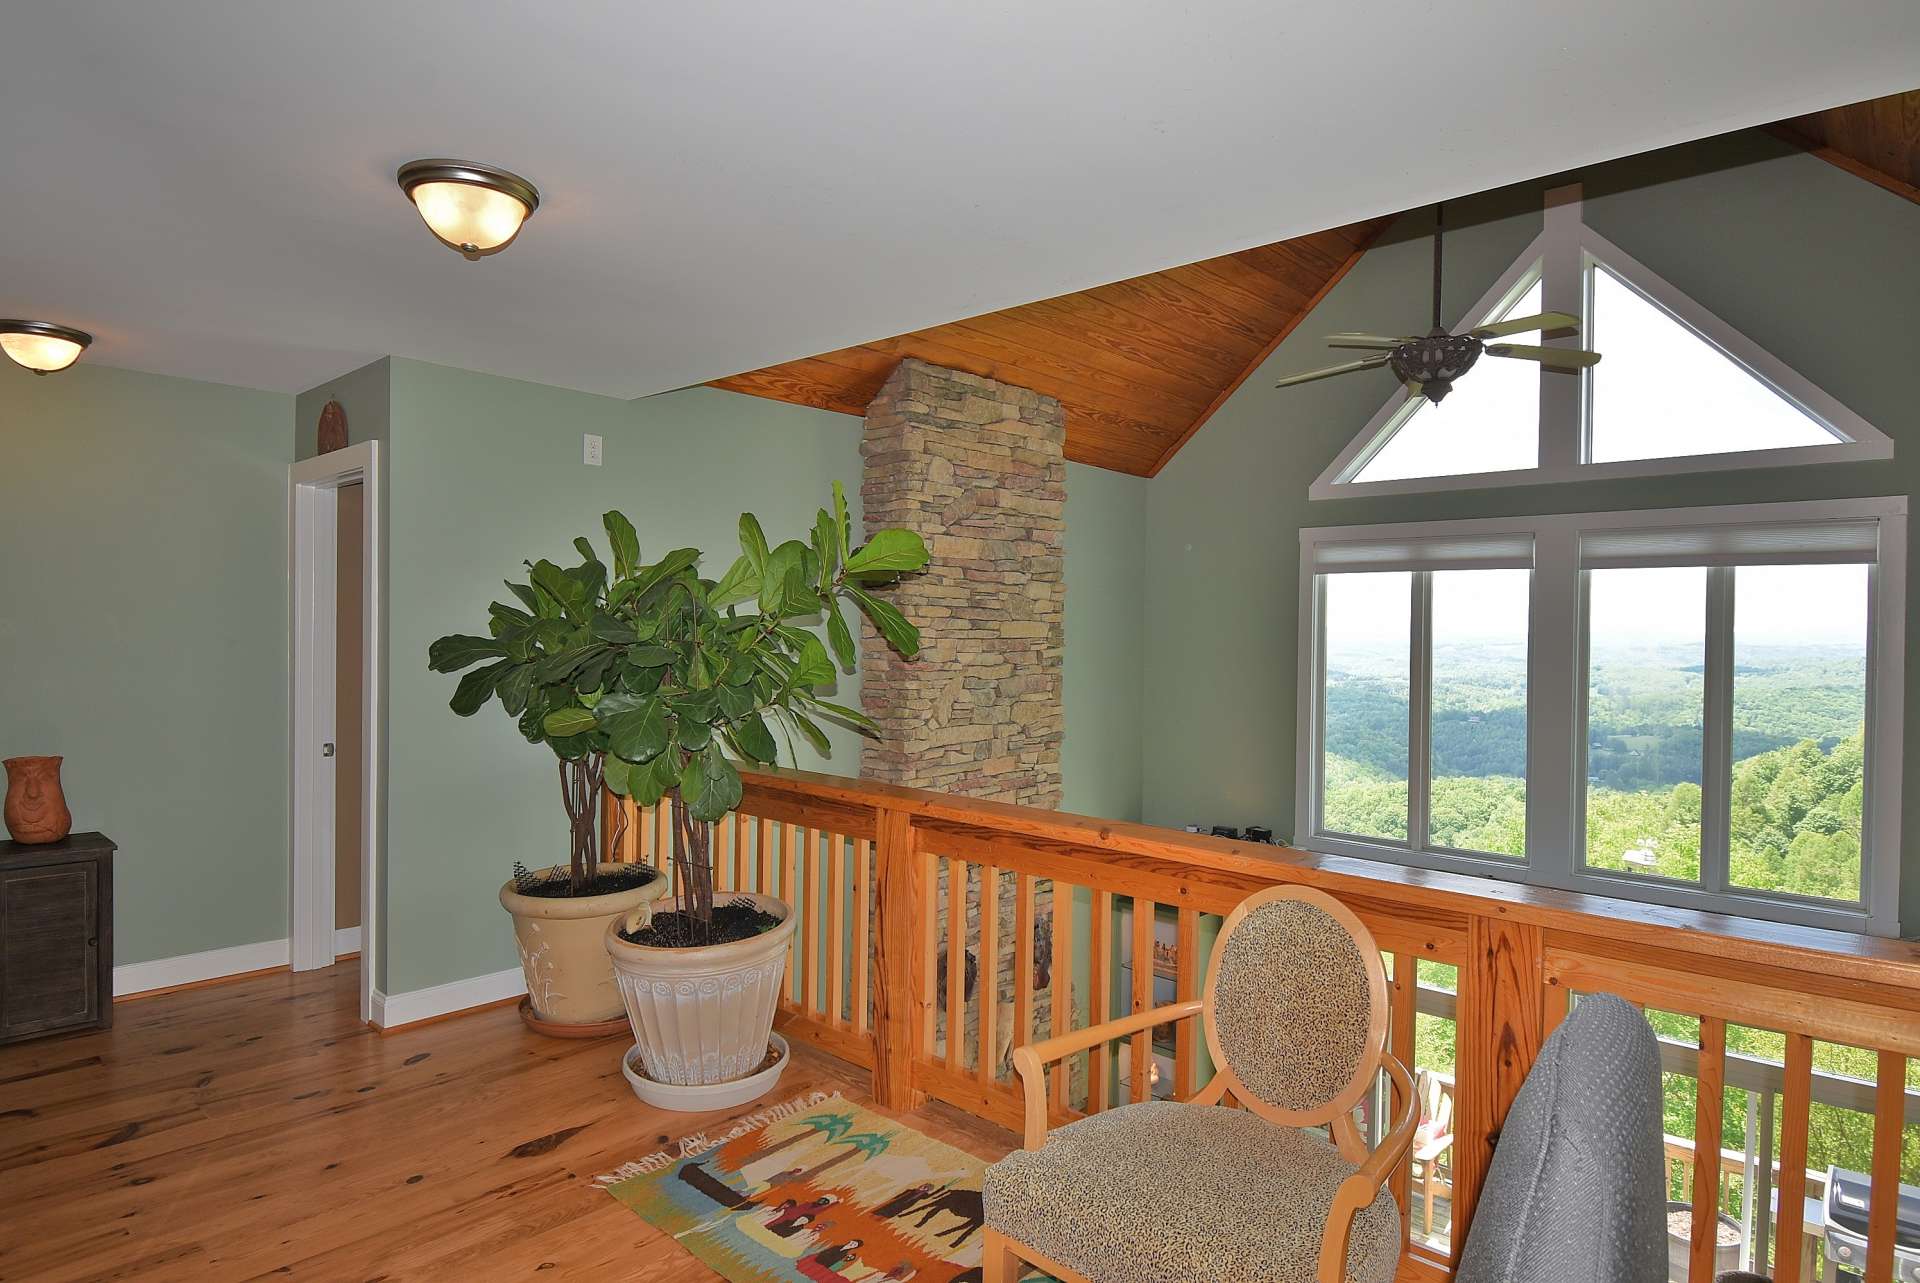 From the loft area, long-range views and mountain scenery serve as a backdrop. This large space offers a range of possibilities such as a study, office or additional sitting area.